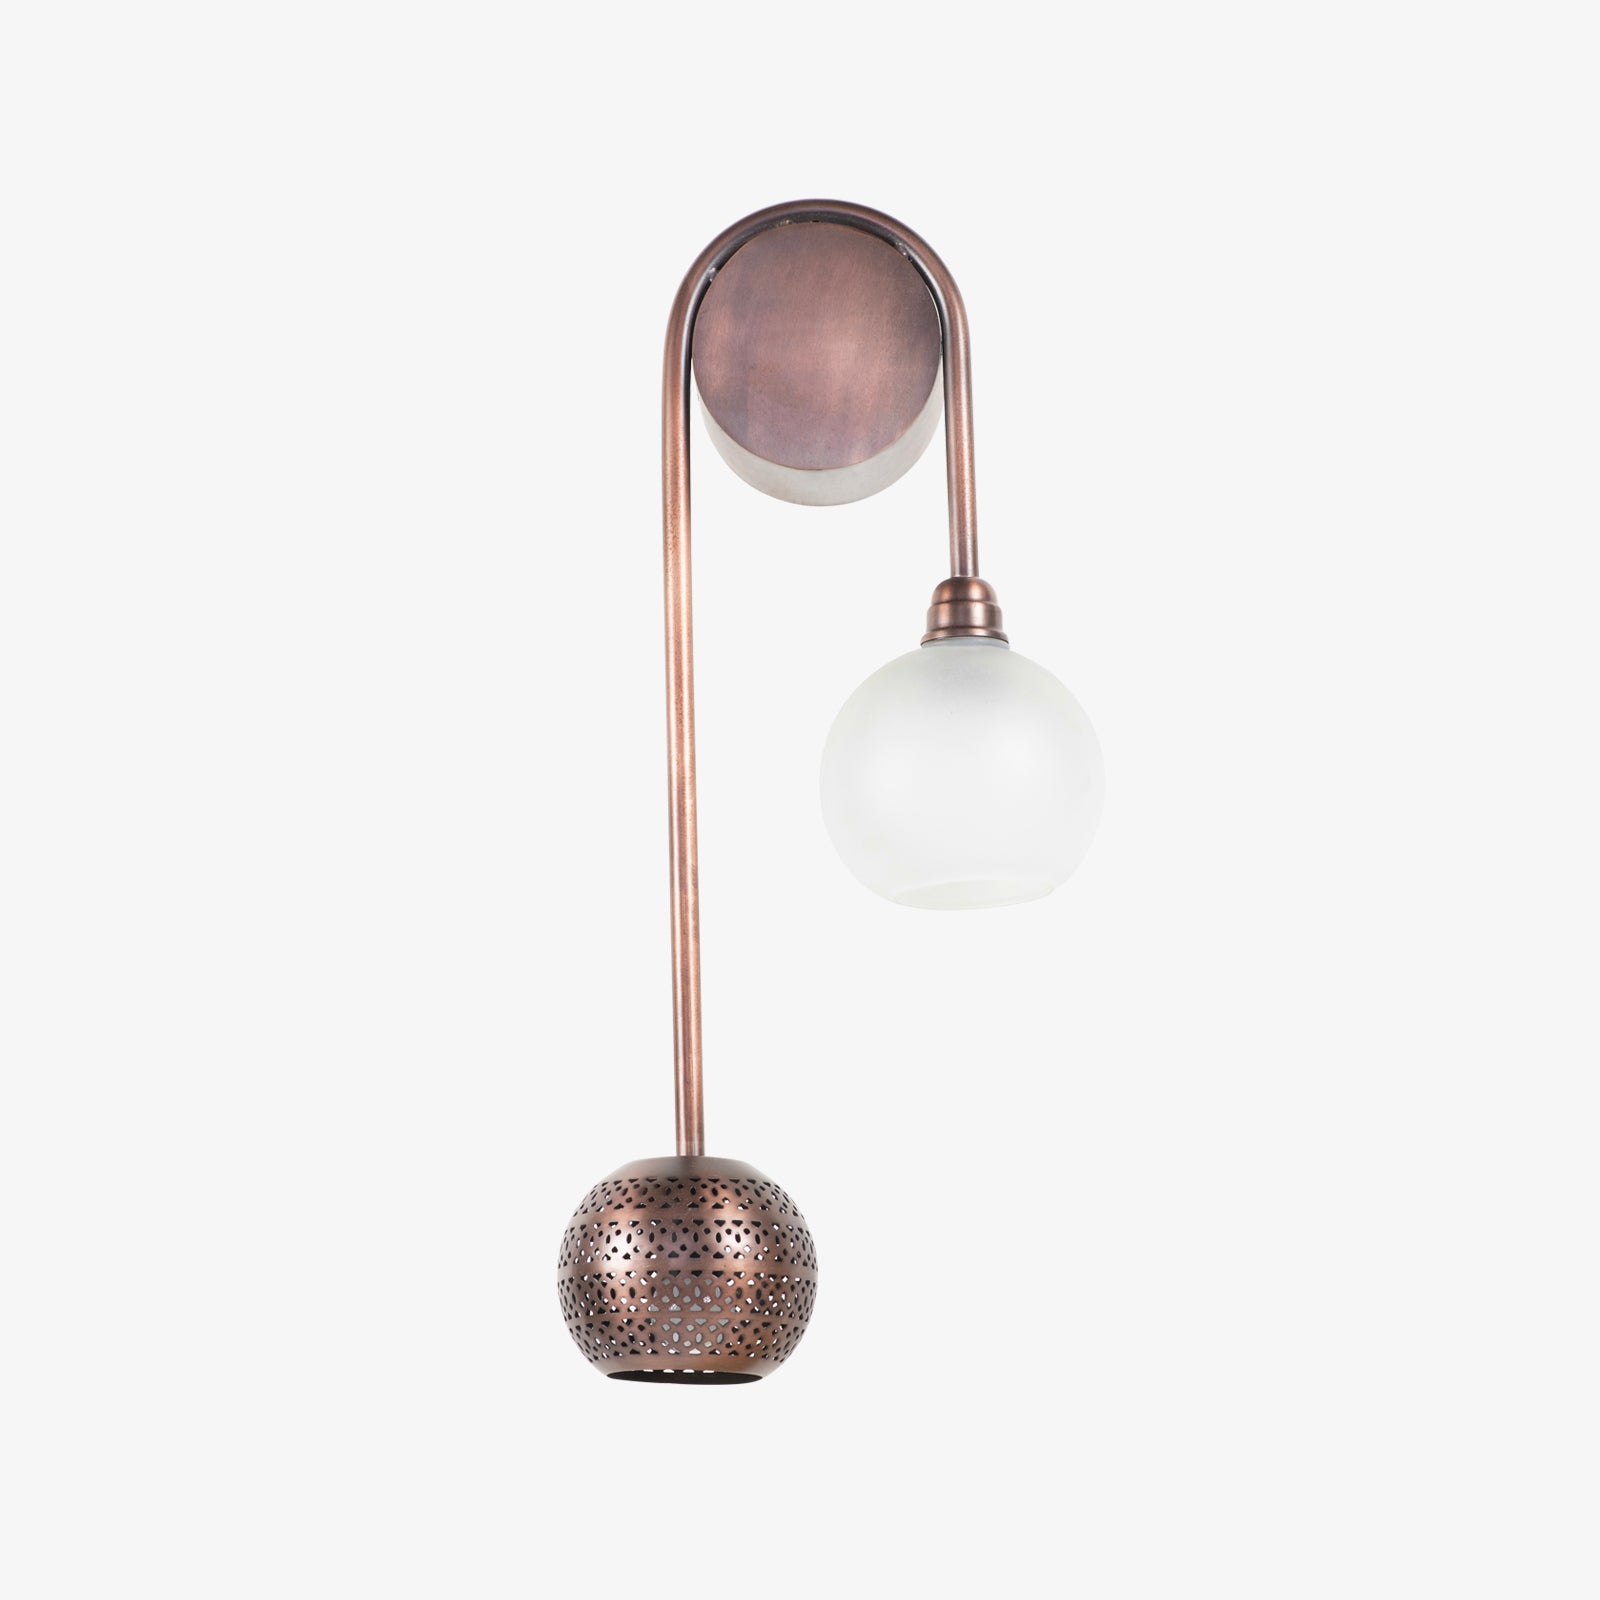 New Soma Copper Wall Lamp